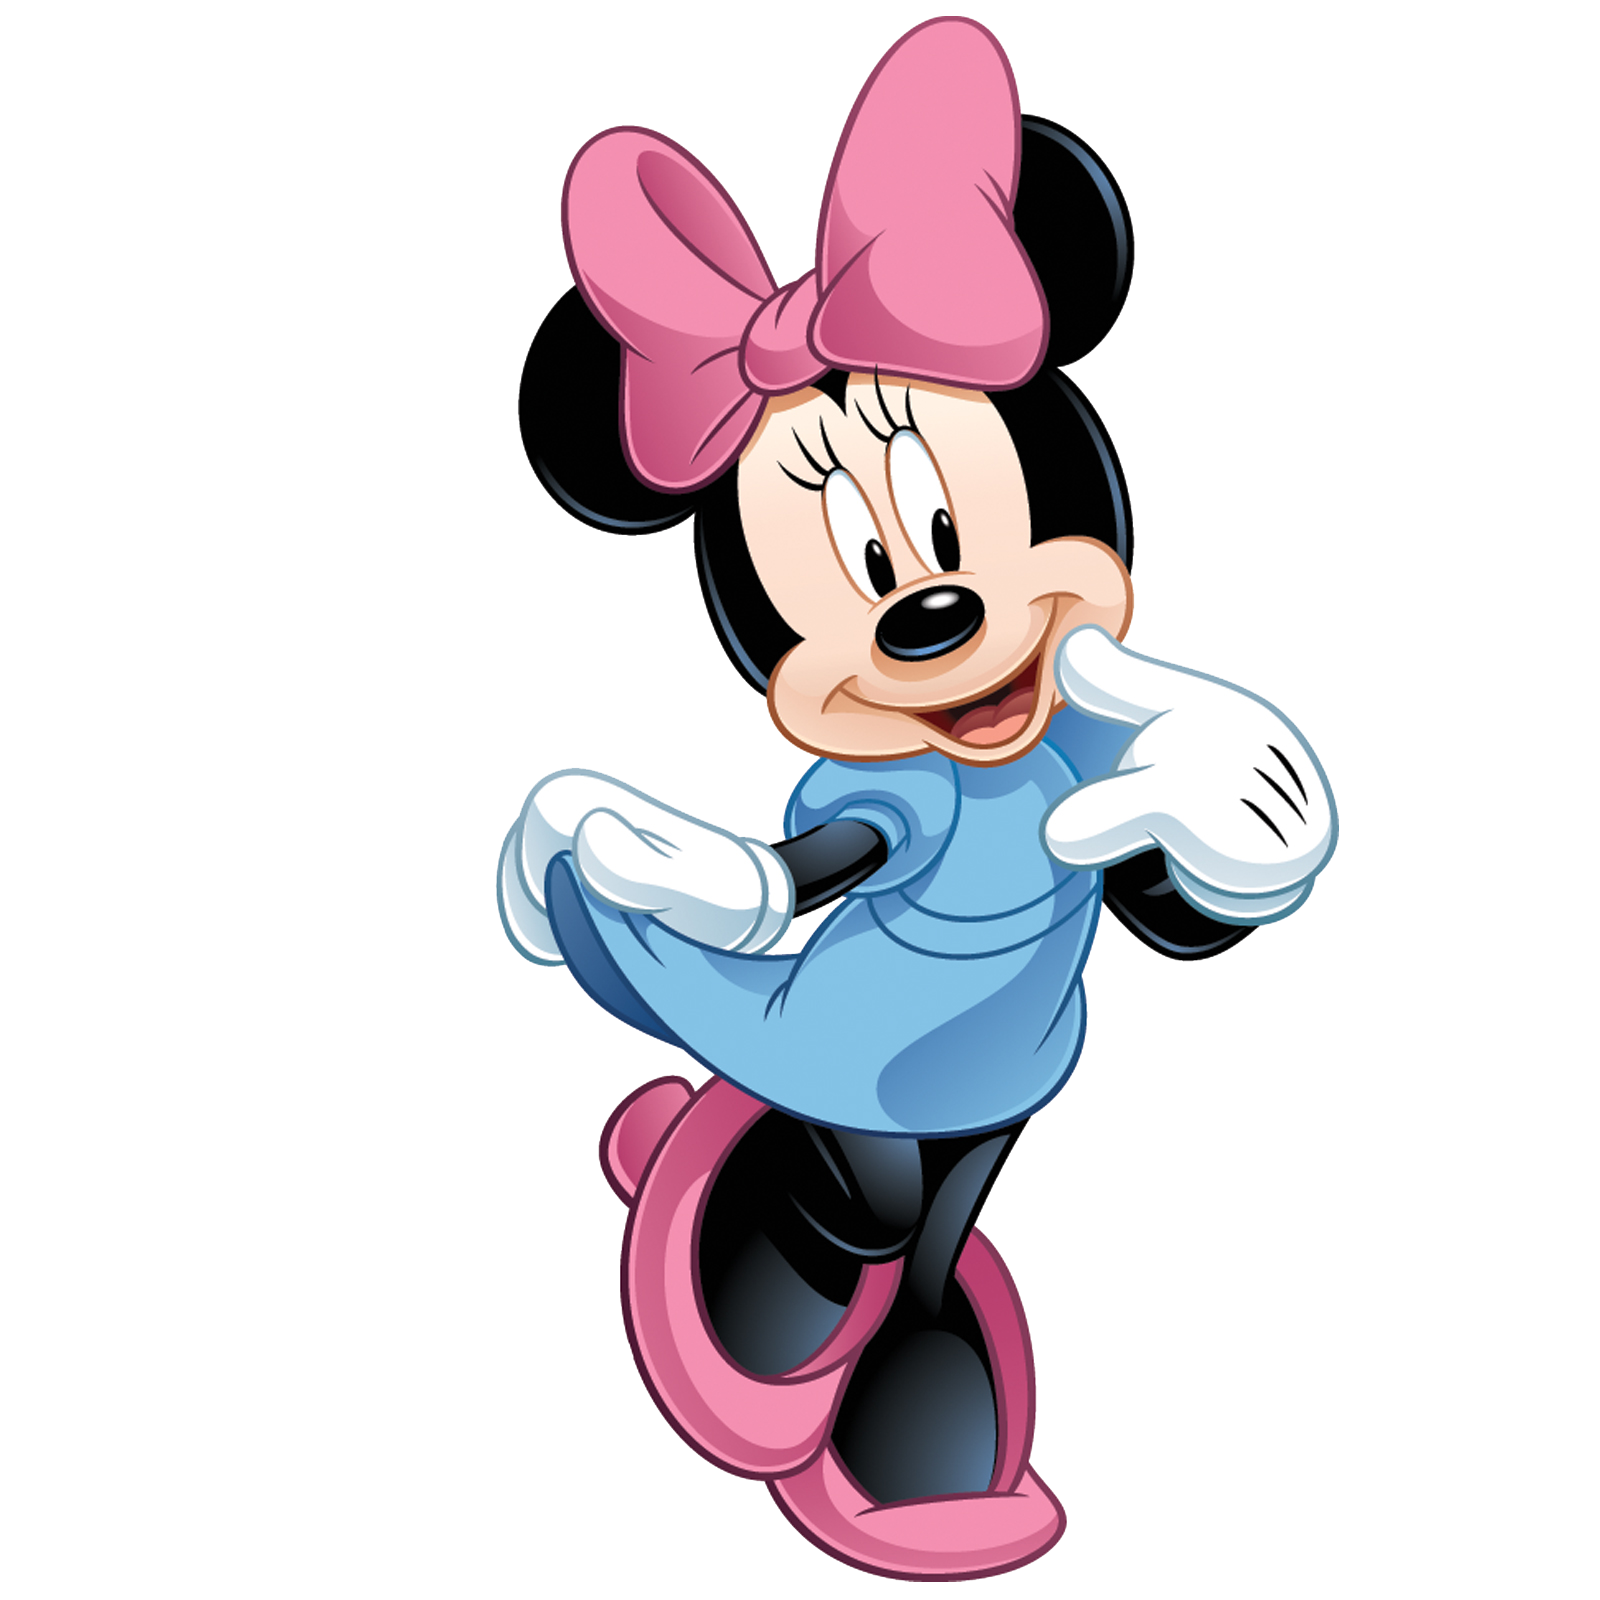 https://static.wikia.nocookie.net/p__/images/e/eb/Pink_Minnie_Mouse.png/revision/latest?cb=20201228130332&path-prefix=protagonist